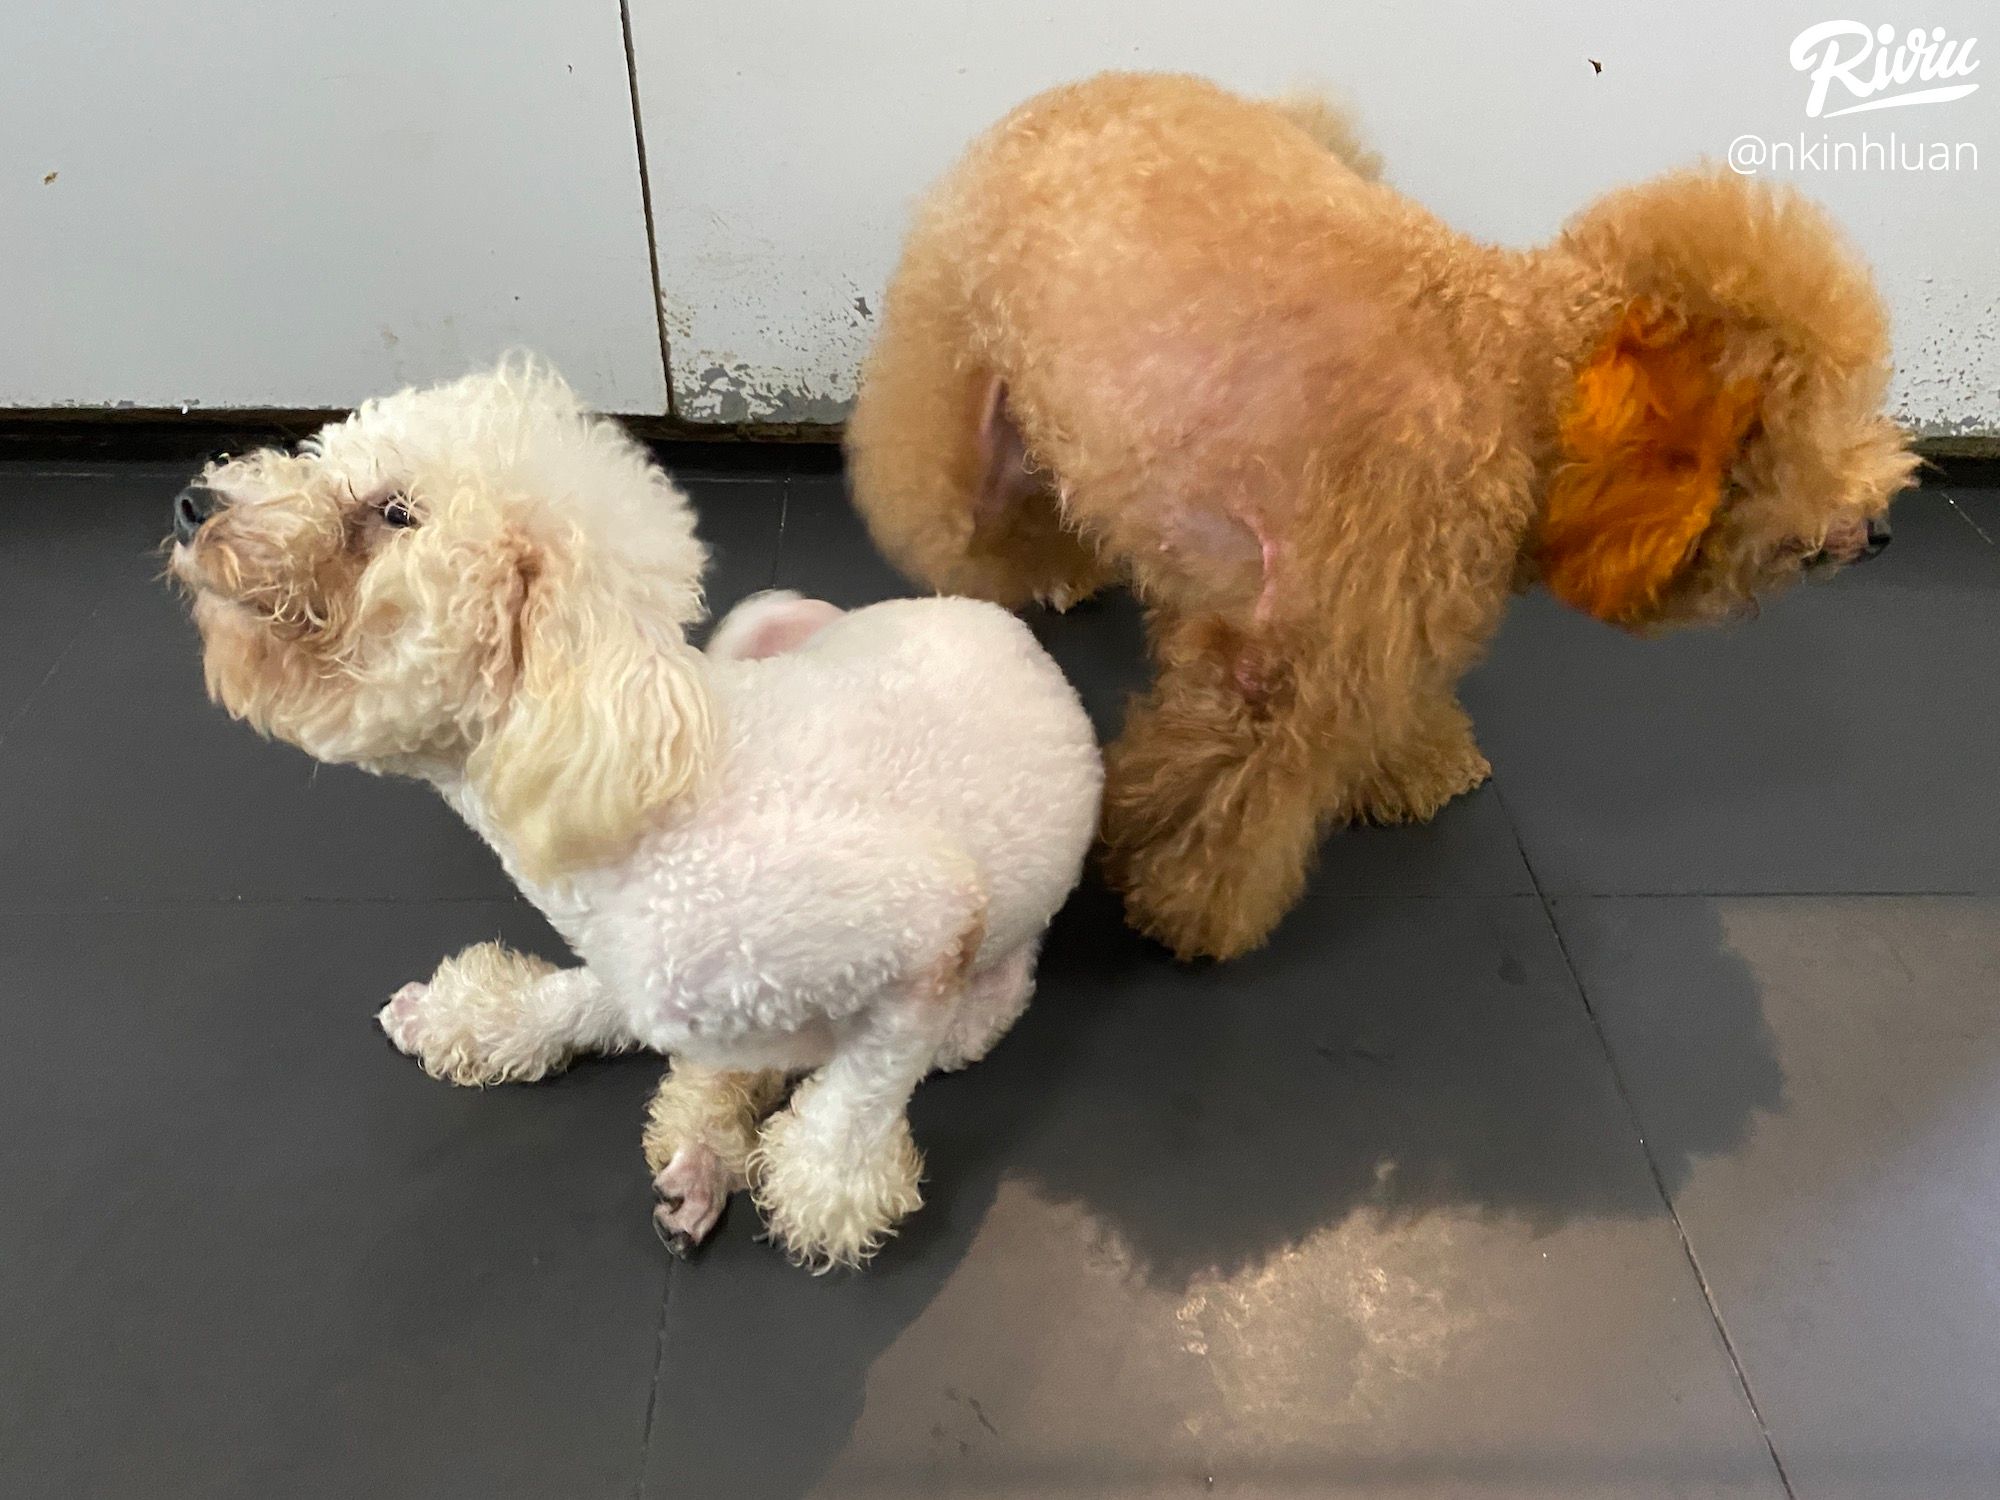 ghe quan poodle house coffee choi voi may chu cho vo cung de thuong - anh 4